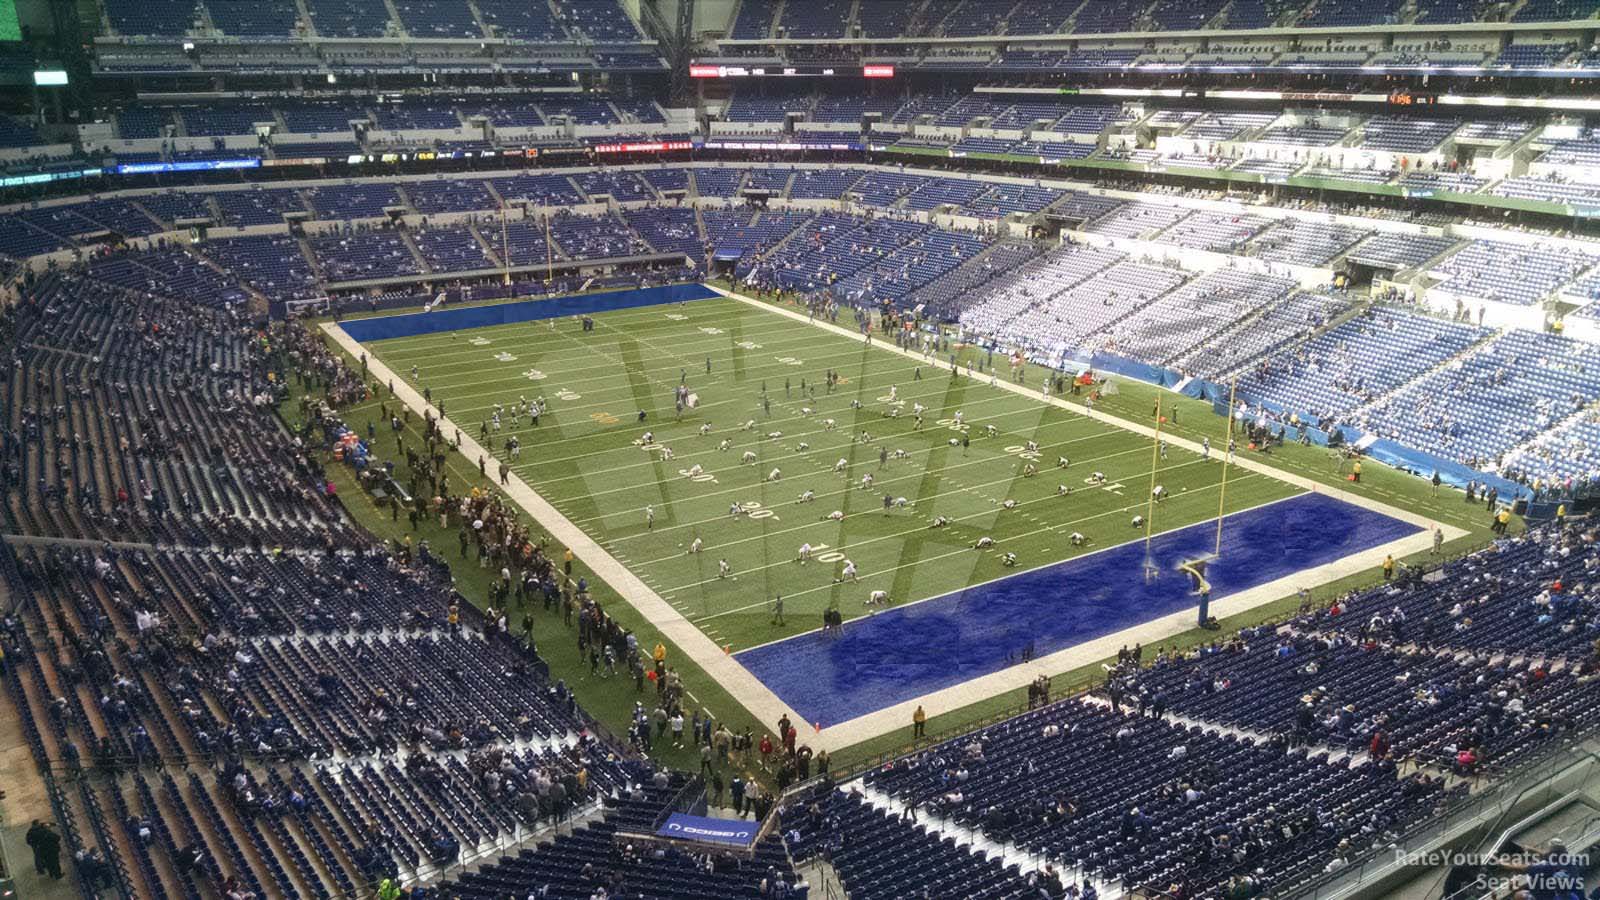 section 504, row 1 seat view  for football - lucas oil stadium